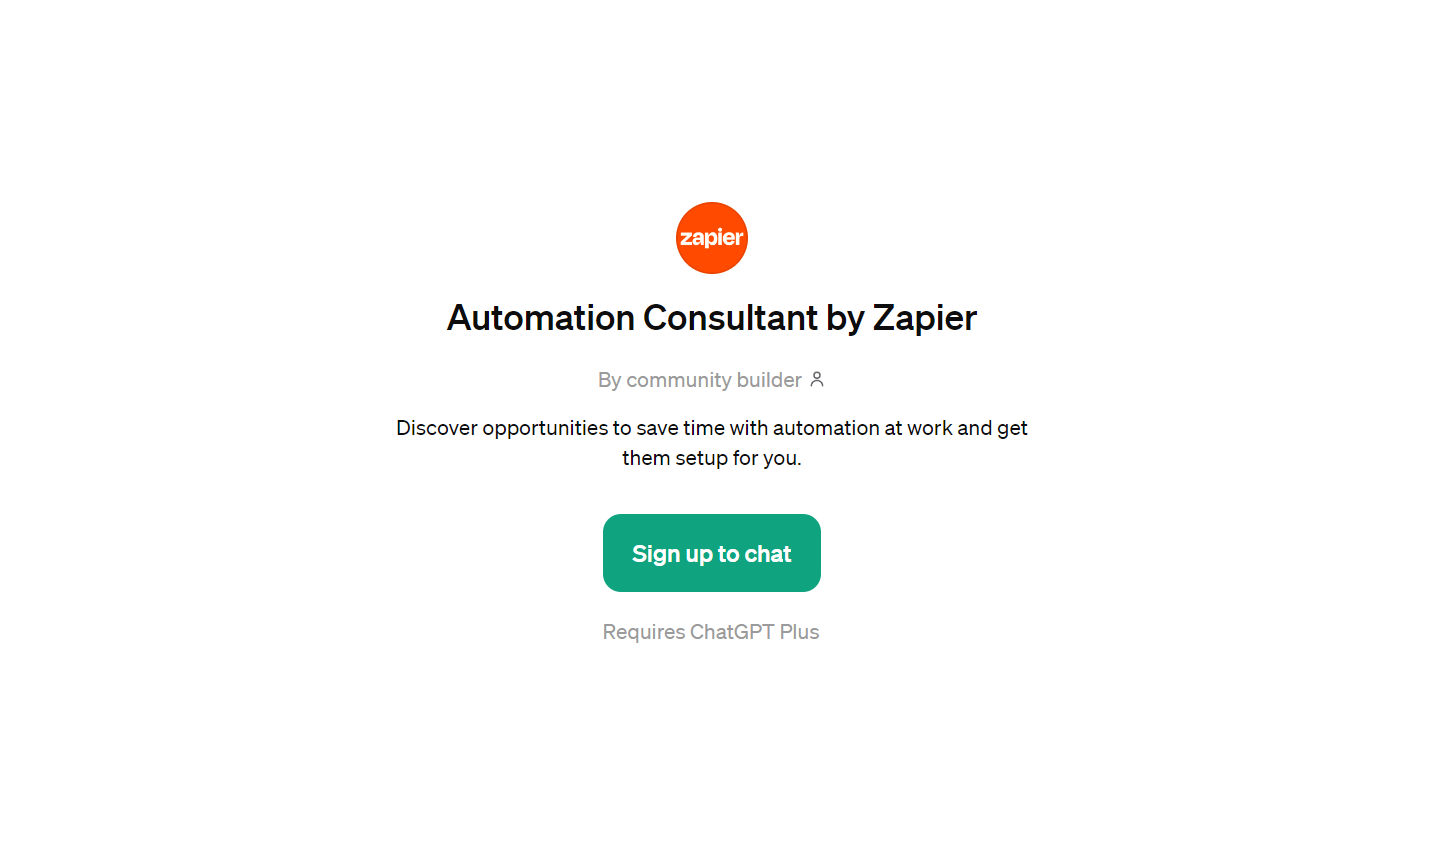 Automation Consultant by Zapier for Improved Efficiency 